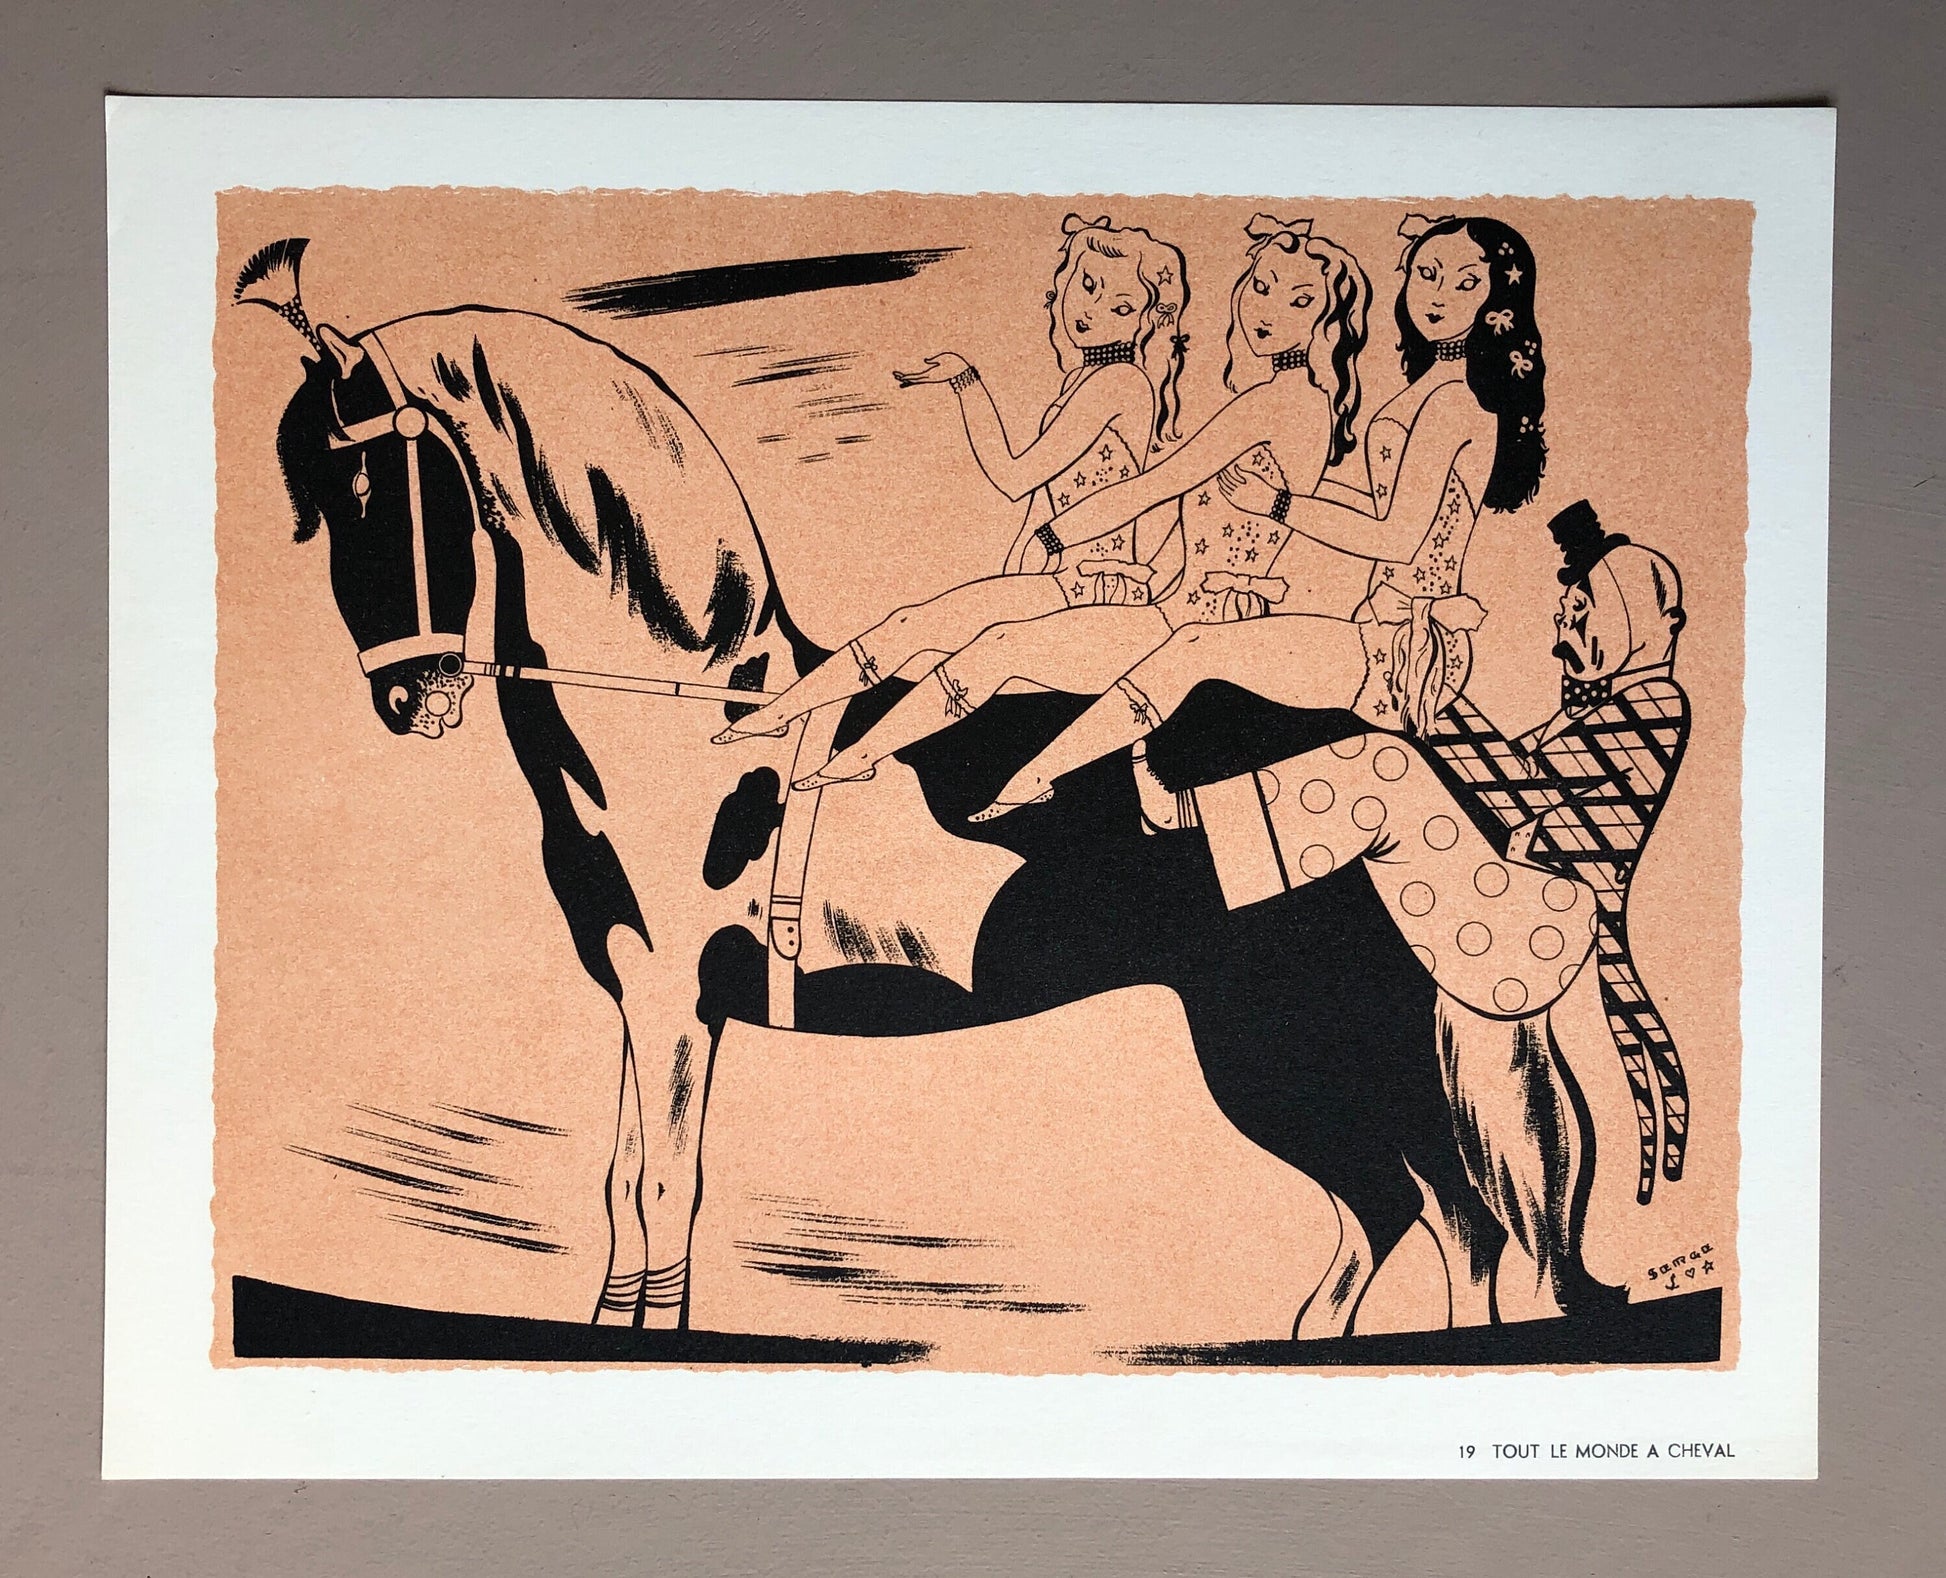 Tout Le Monde A Cheval. An Original Lithograph From Le Parorama Du Cirque by Serge. One of only 1000 produced in 1944. Size: 24 x 29.7 cms.